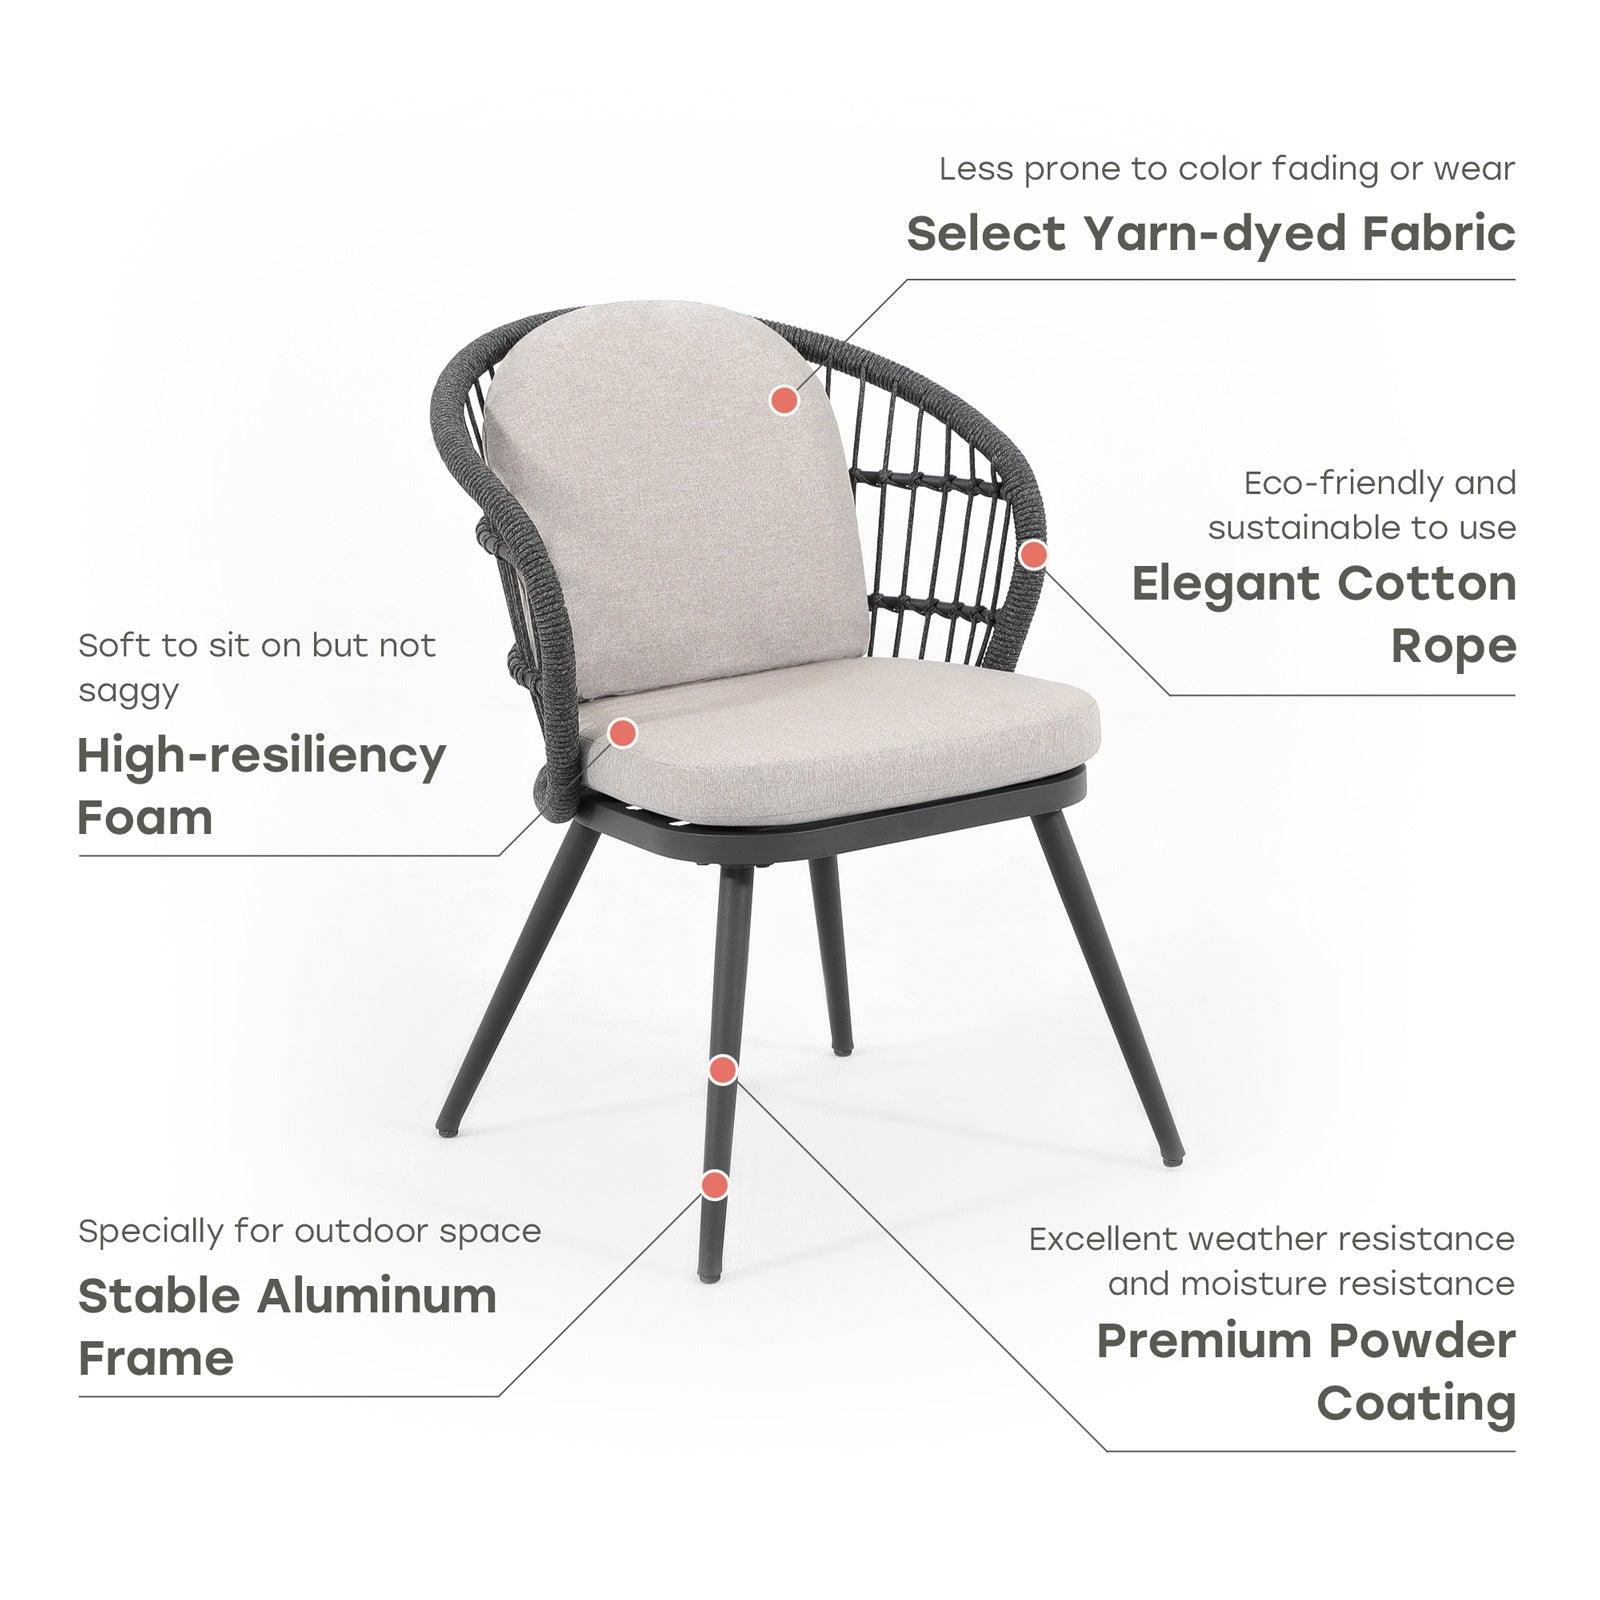 Comino dark grey chair rope, shell-shaped back rest, Product Information- Jardina Furniture